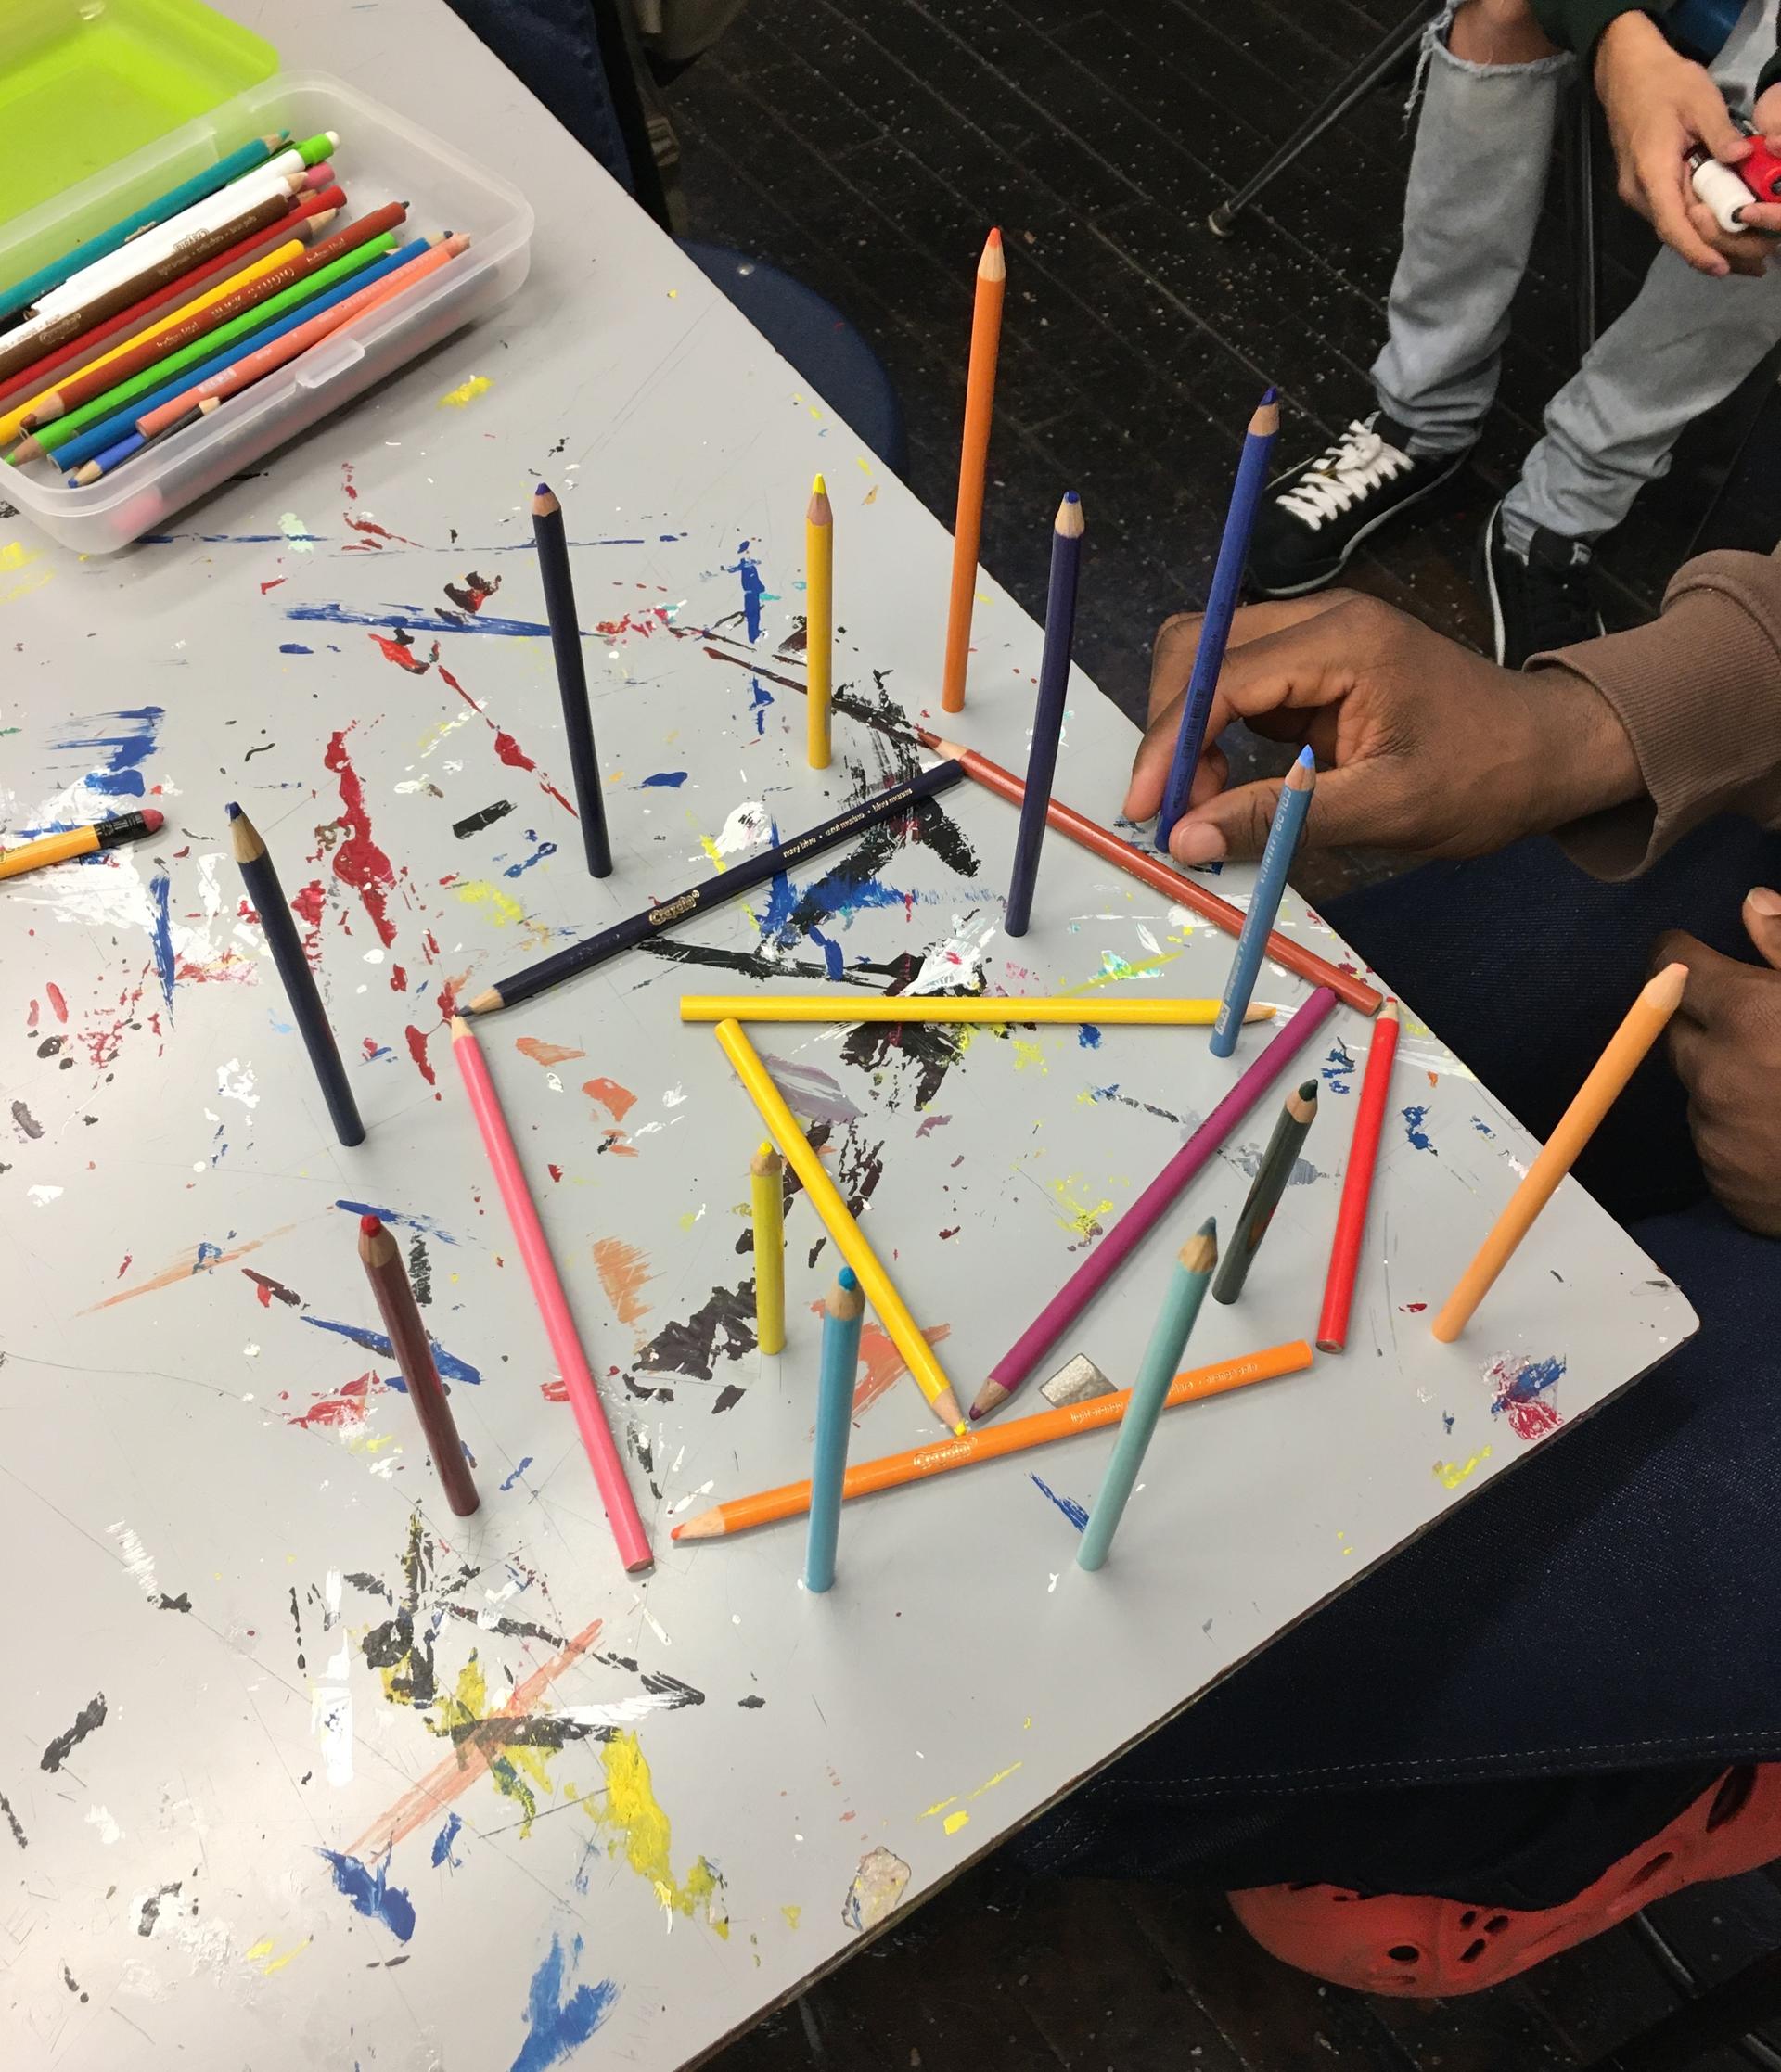 A student’s hand placing one of 13 colored pencils that are standing on their ends, pointing vertically upwards from a paint-splotched table. The vertical pencils surround 3 colored pencils lying flat on the table in the shape of a triangle, inside a pentagon made of 5 colored pencils. Another student’s legs and hand can be seen in the corner of the image.